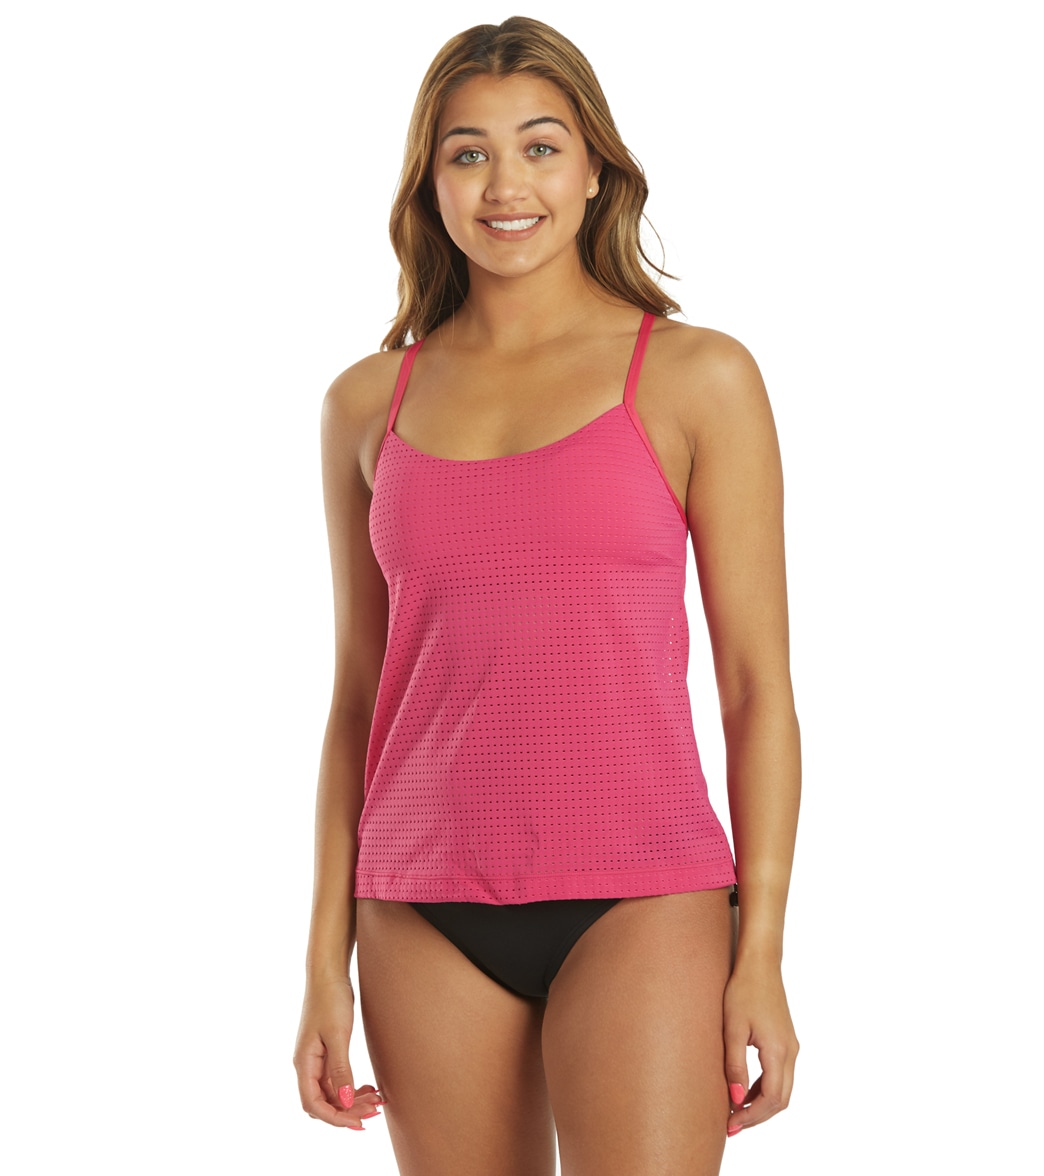 Nike Women's Chlorine Resistant Essential Layered Tankini Top - Fireberry Small - Swimoutlet.com